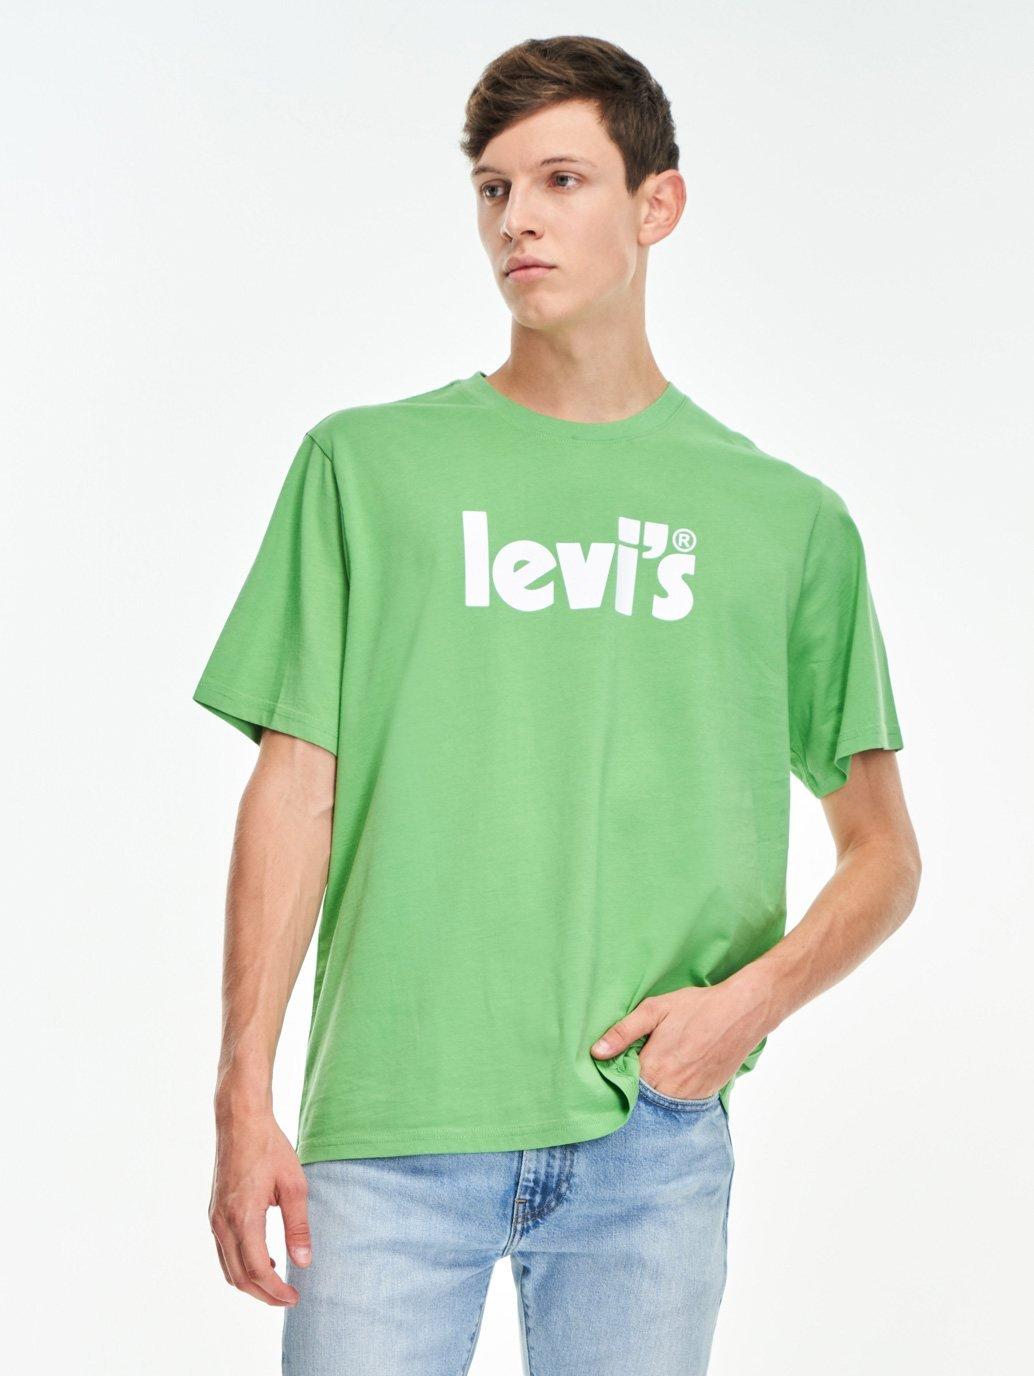 levis singapore mens relaxed fit short sleeve t shirt 161430581 10 Model Front